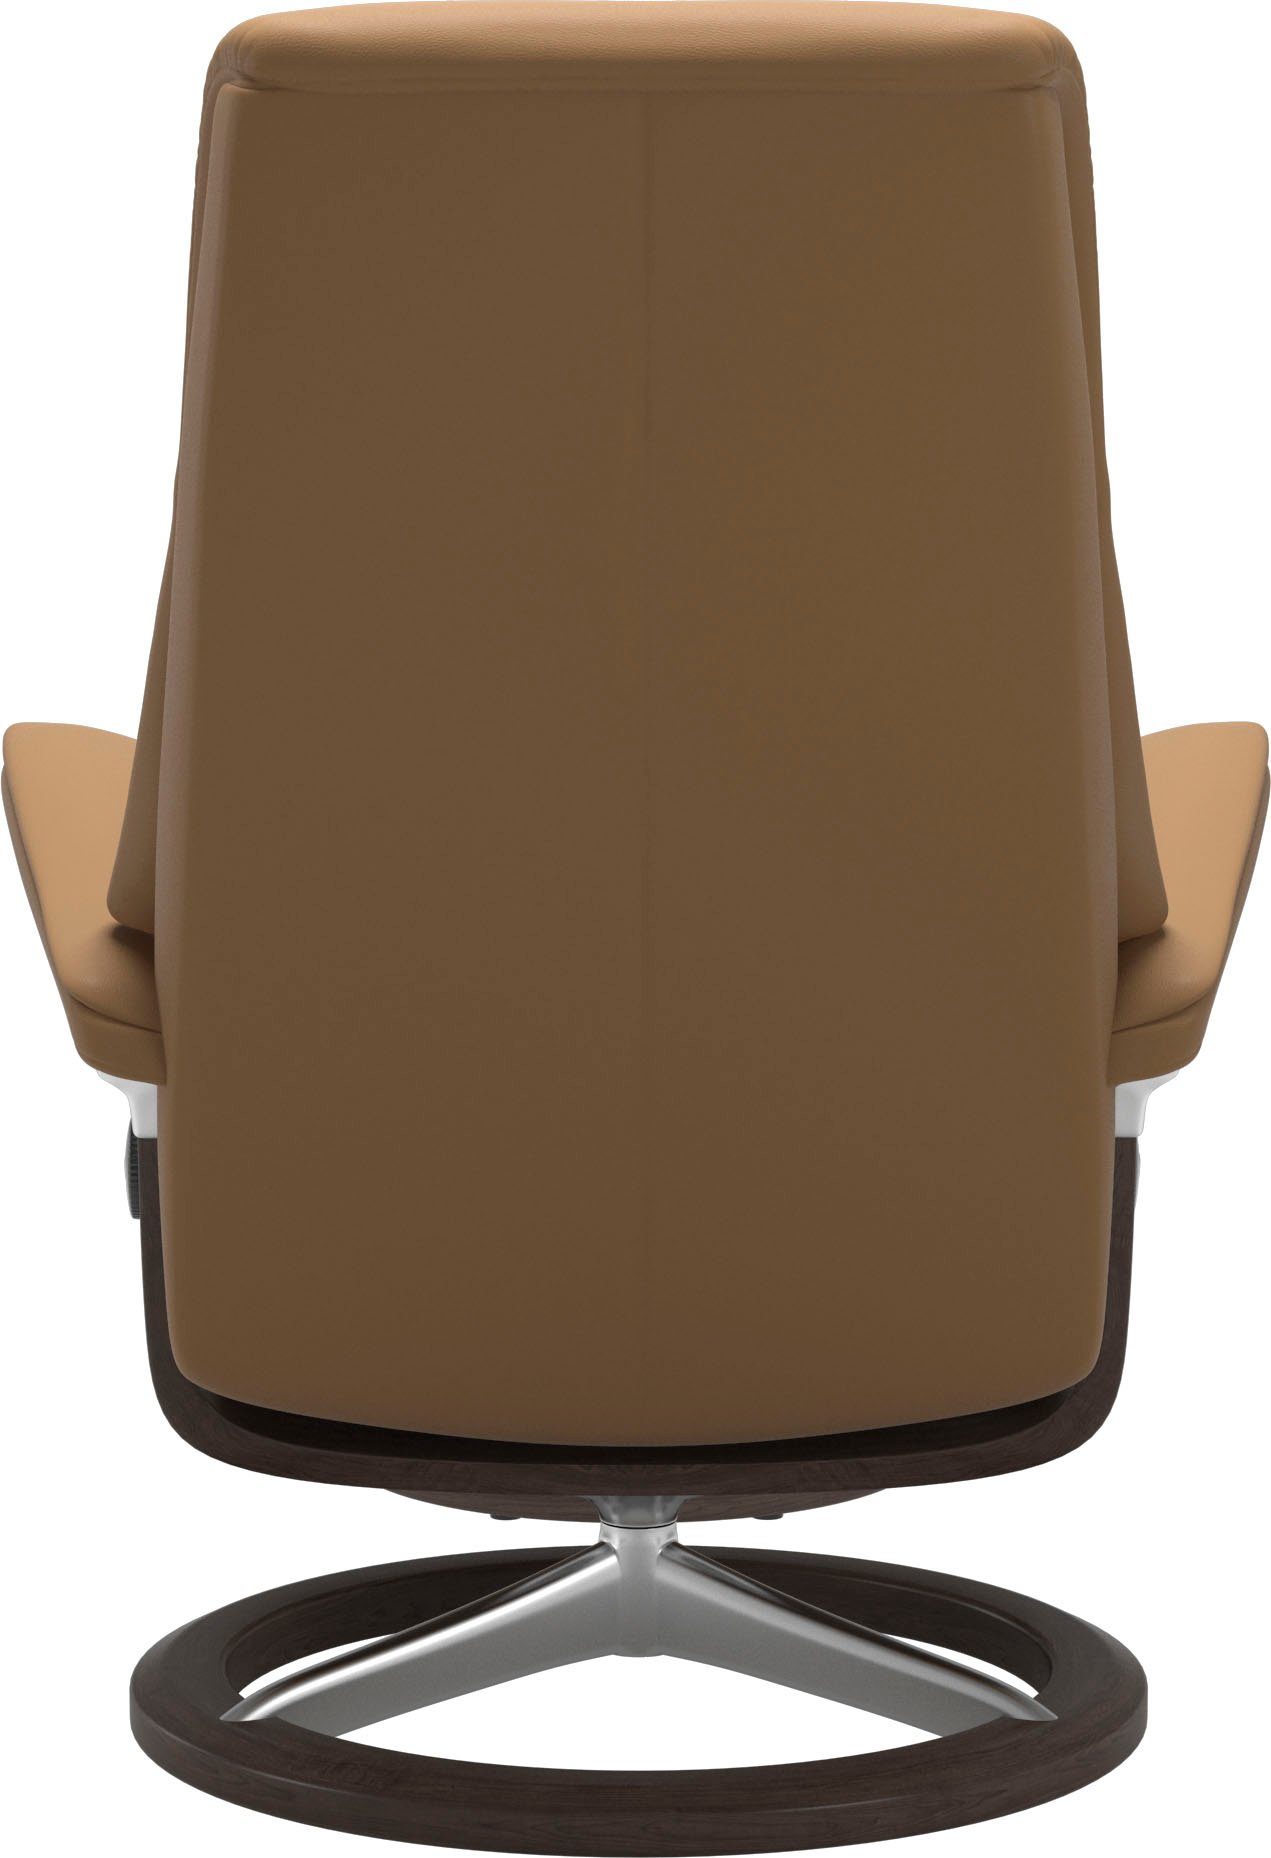 Größe Signature View, Wenge Stressless® Base, S,Gestell Relaxsessel mit